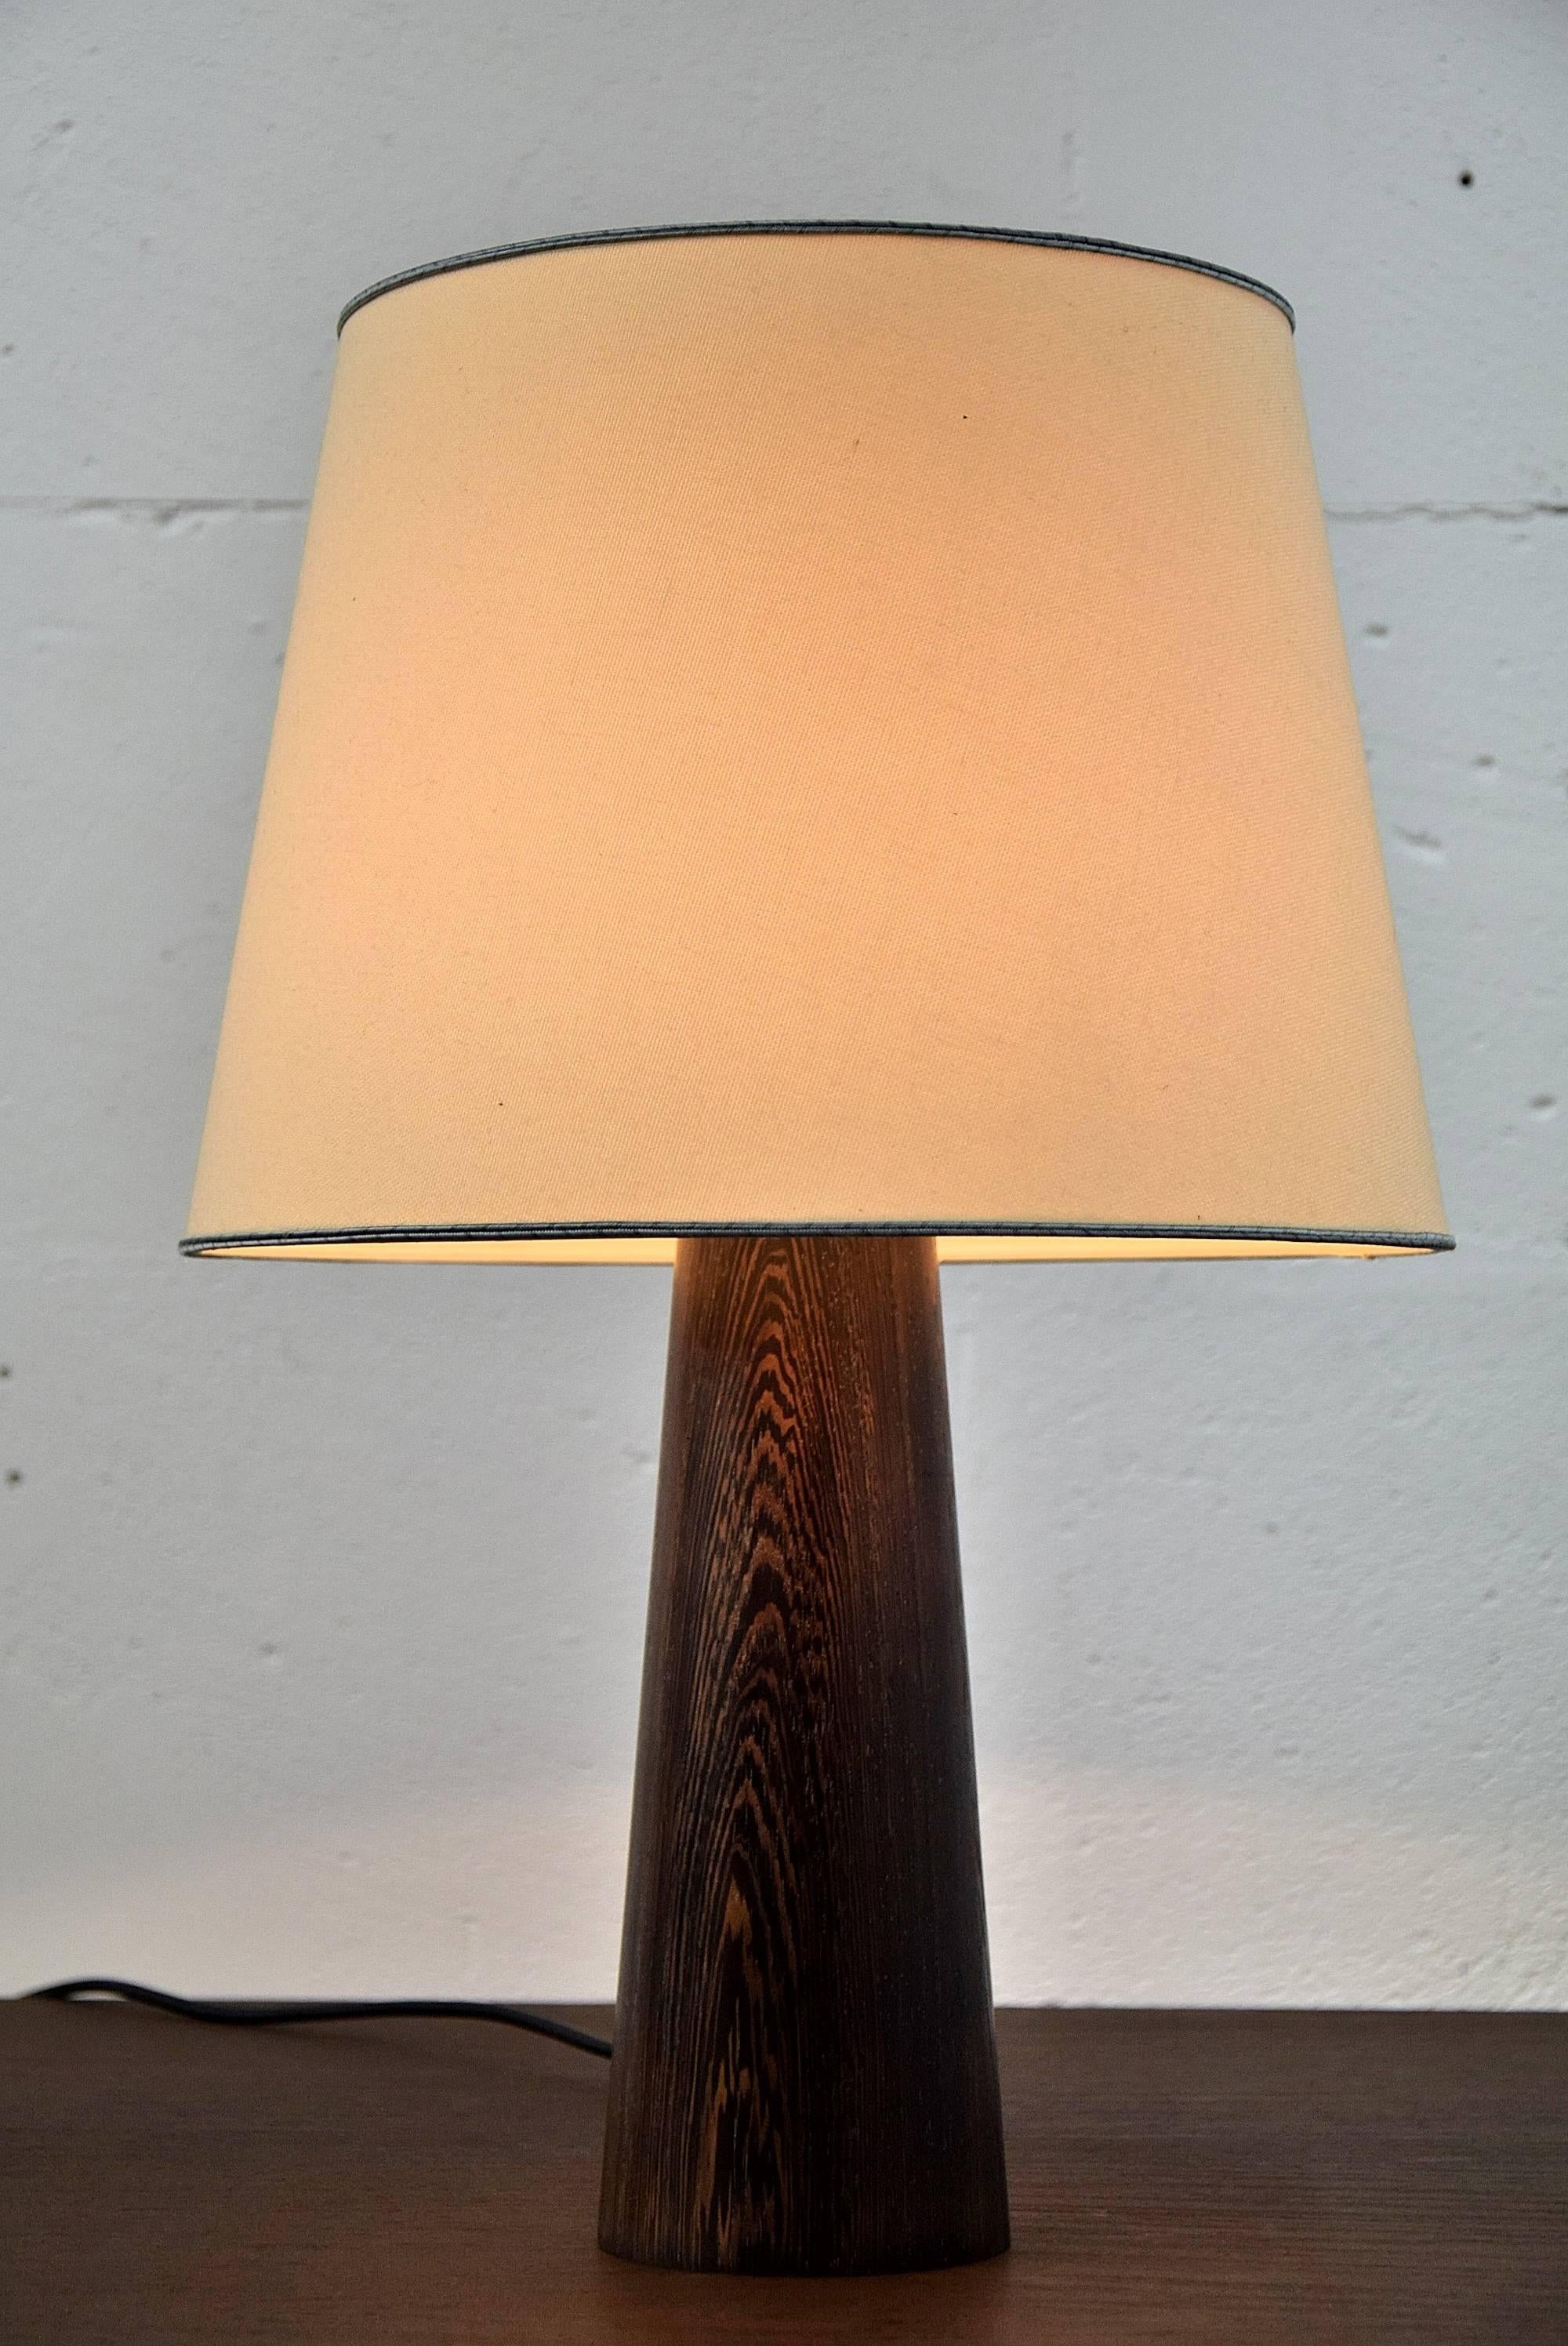 Danish, 1960s wenge table lamp.

Elegant Mid-Century table lamp made of the now protected tropical wenge wood.

Measurements: D 31 x H 46 cm.